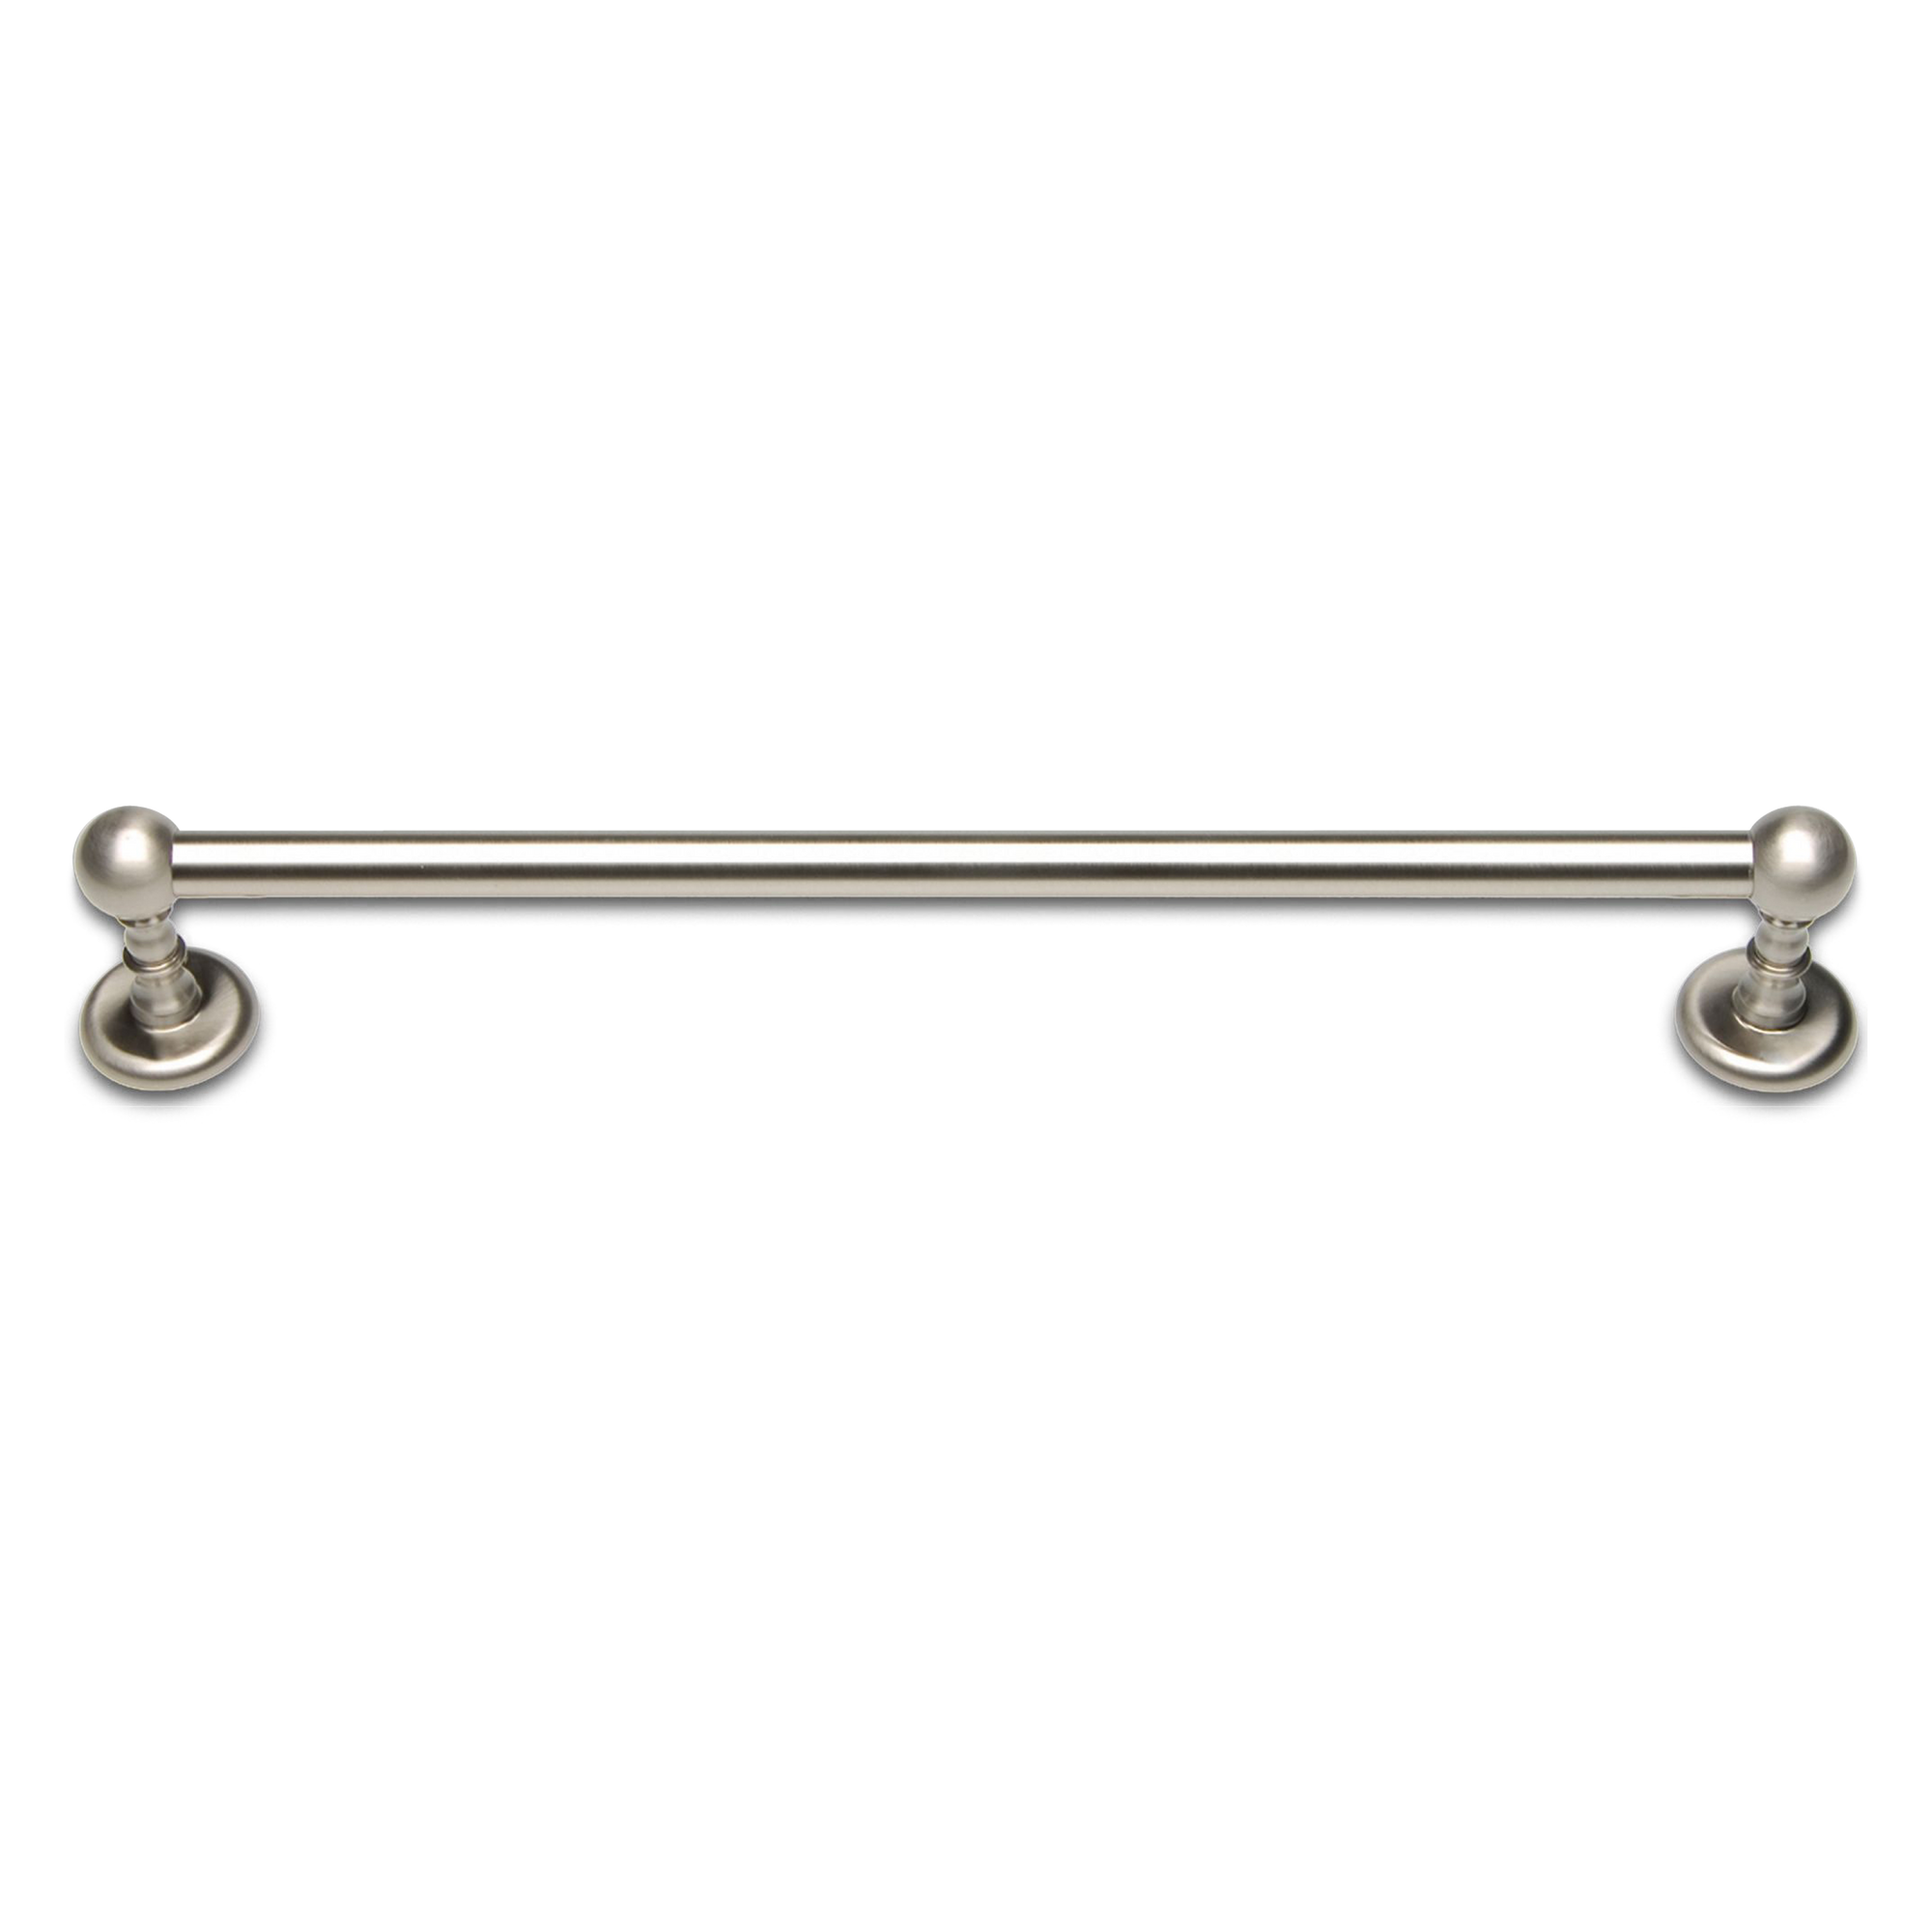 Traditional and elegant towel bar in a polished nickel finish.